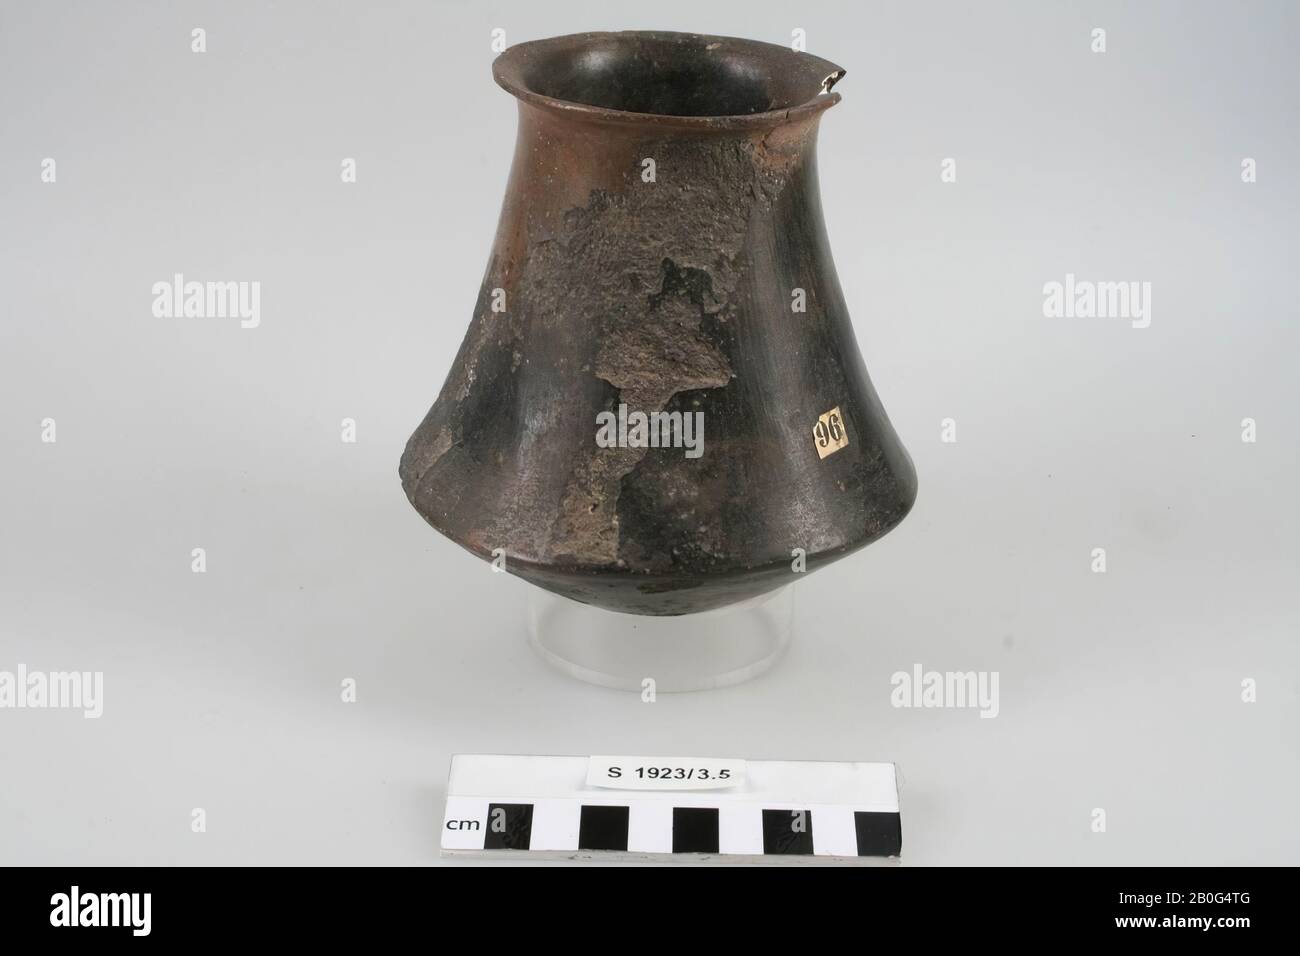 Old additions, chips off at the bottom and the neck. Contains cremated residues, urn, earthenware, h: 13.8 cm, diam: 13.2 cm, prehistory, Spain Stock Photo